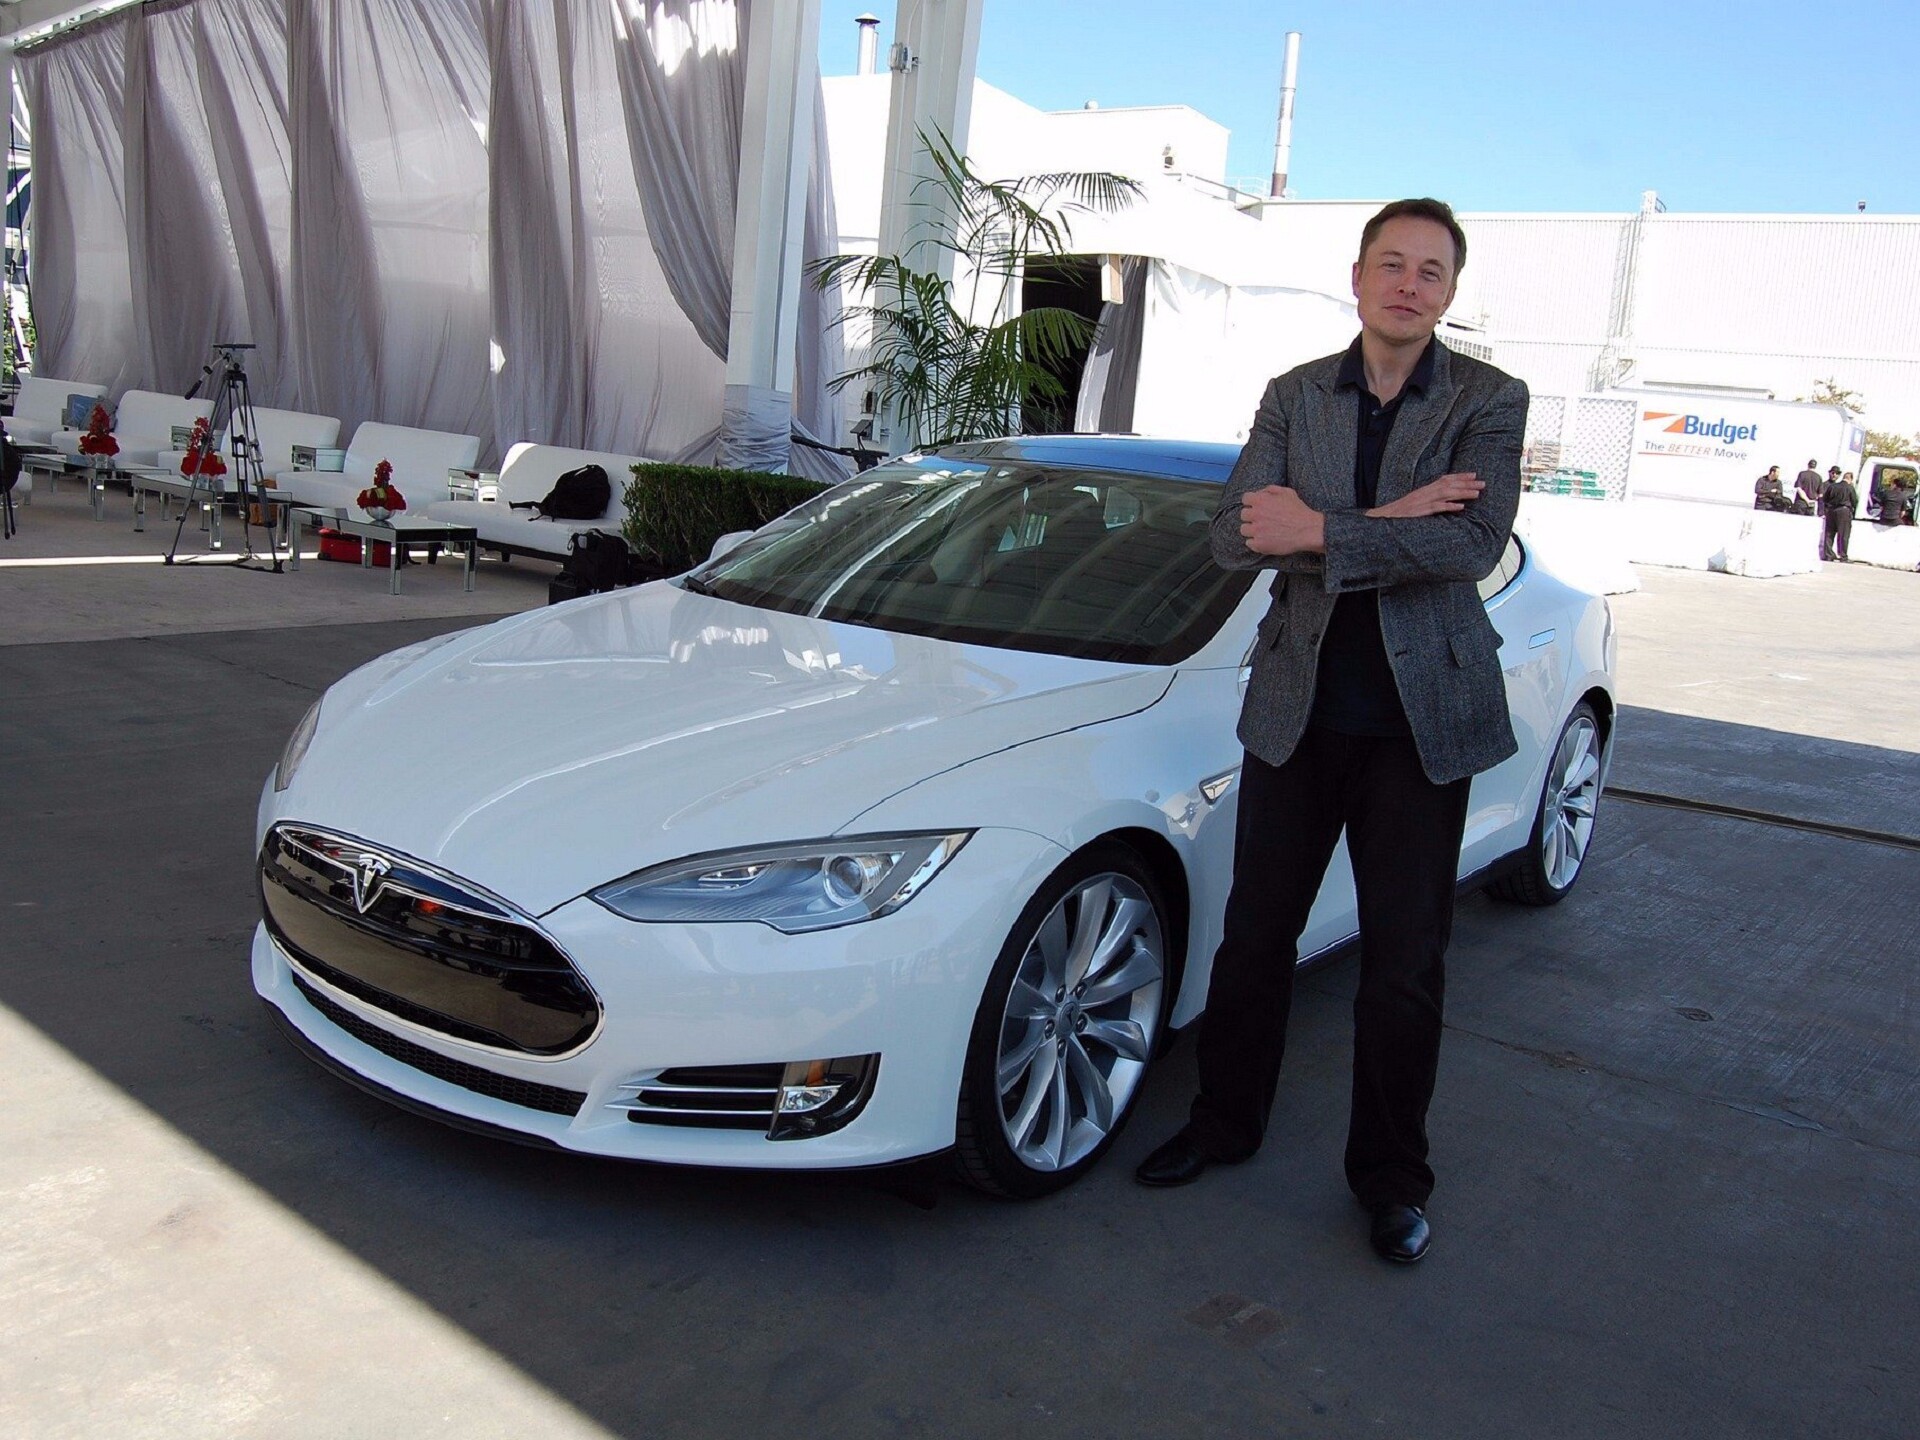 Elon Musk: One of the first significant investors in the electric car manufacturer Tesla. 1920x1440 HD Wallpaper.